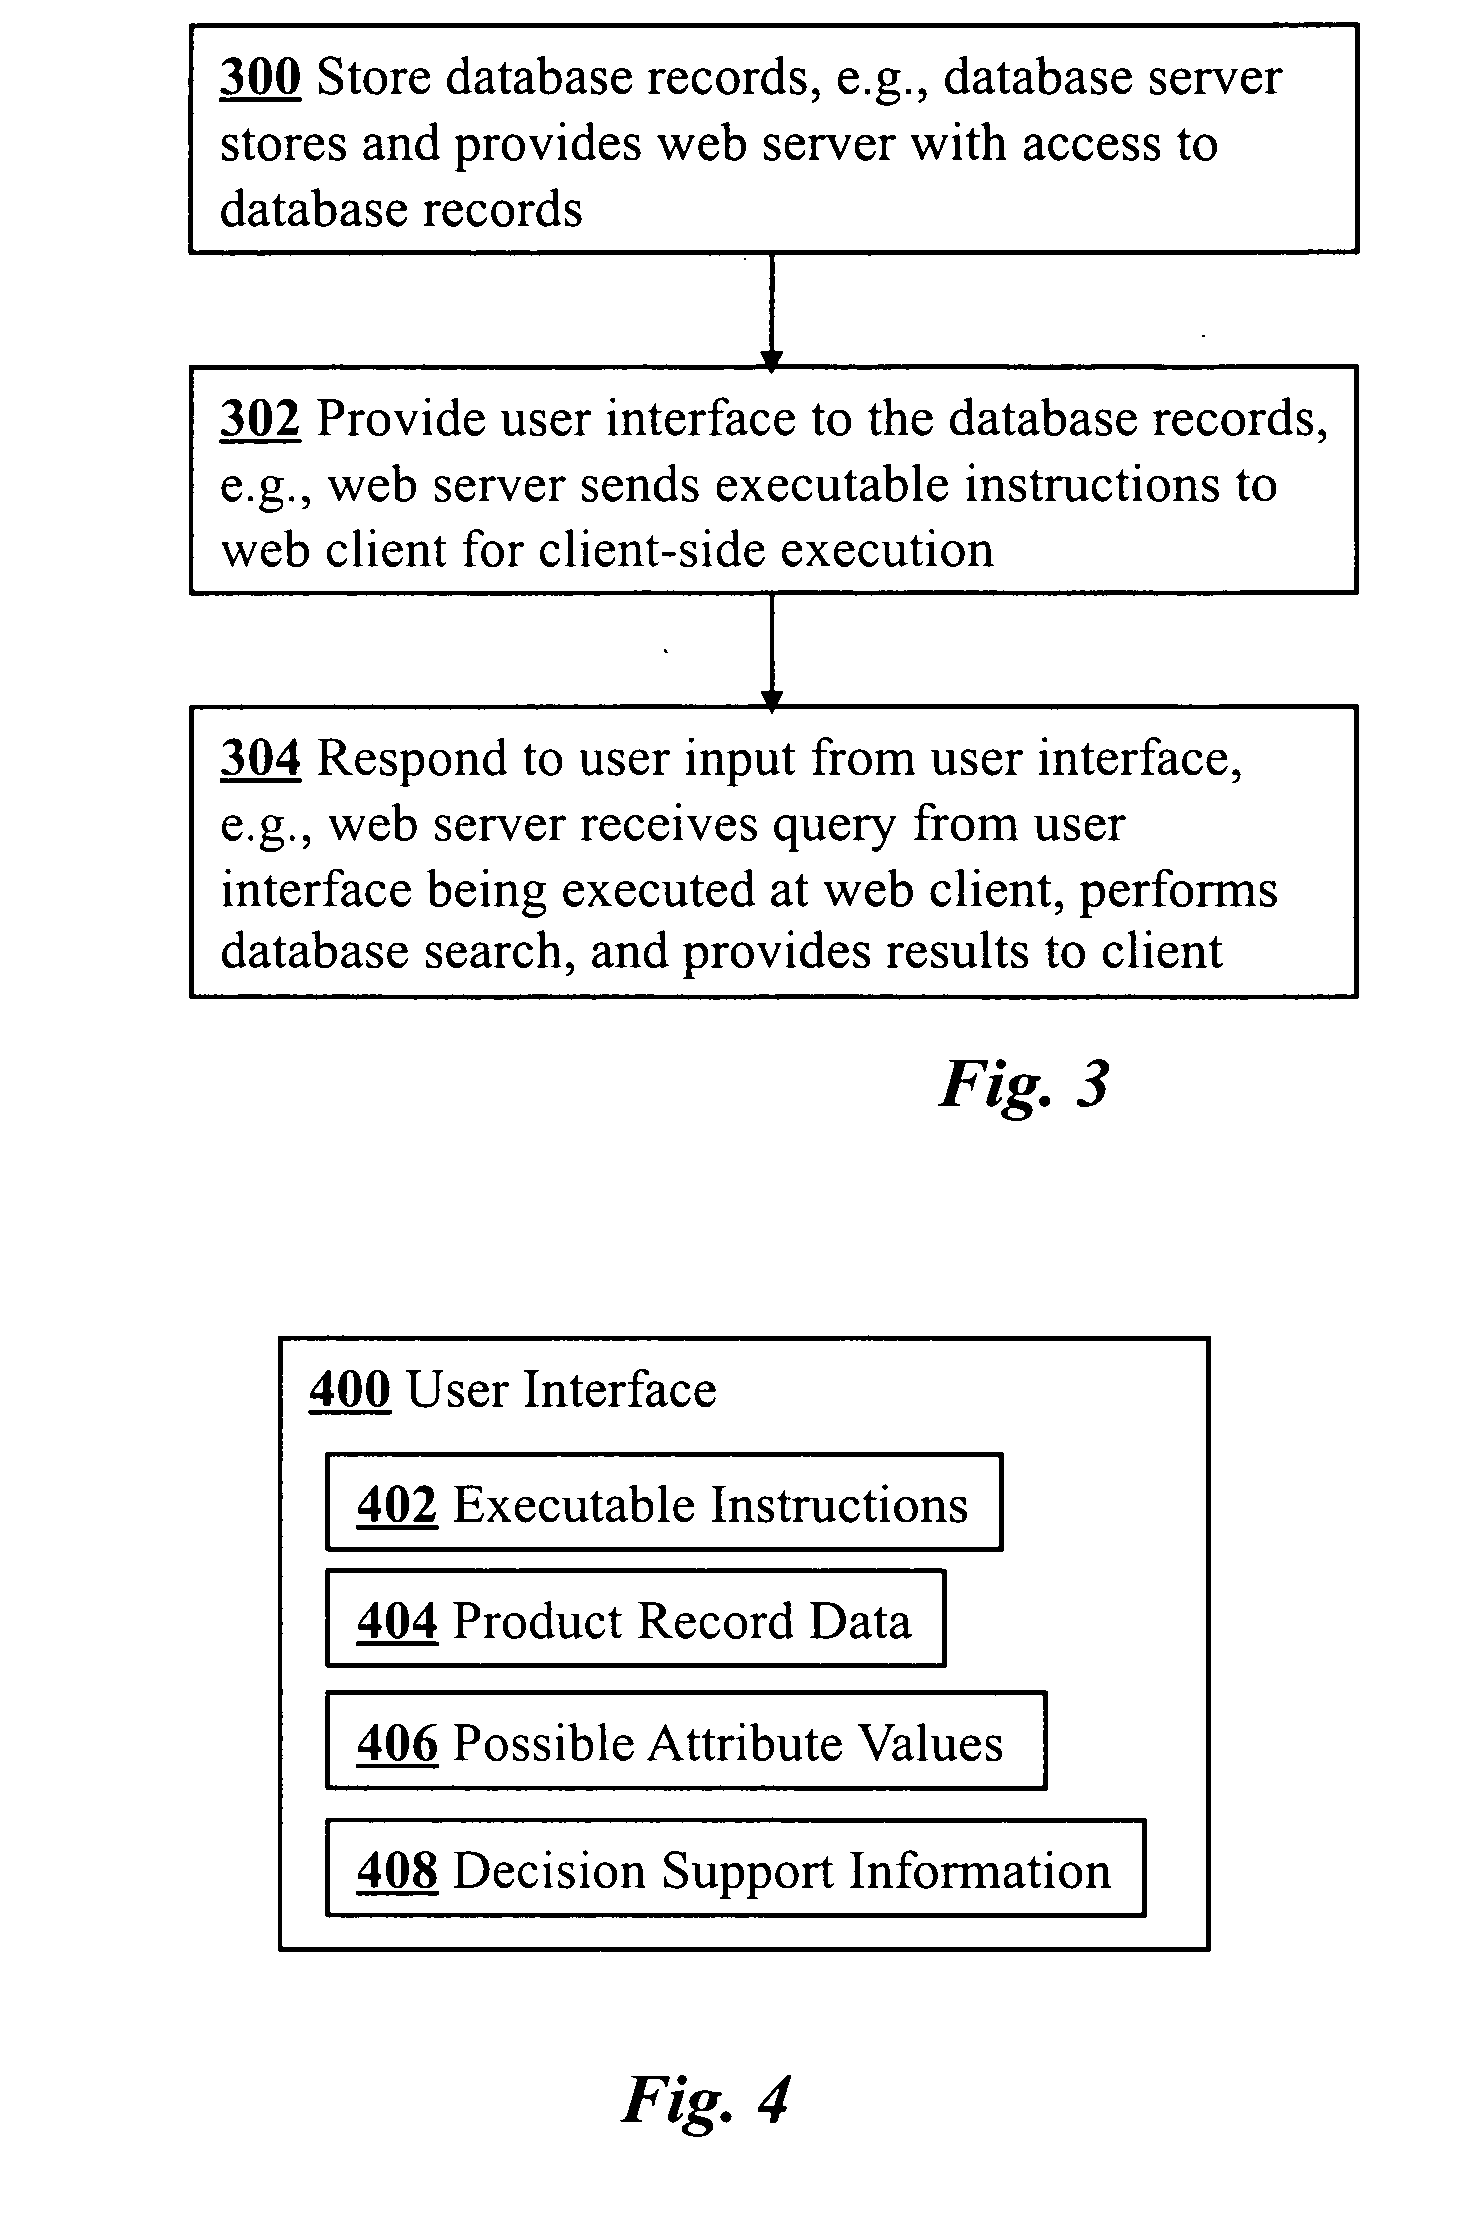 Display and search interface for product database